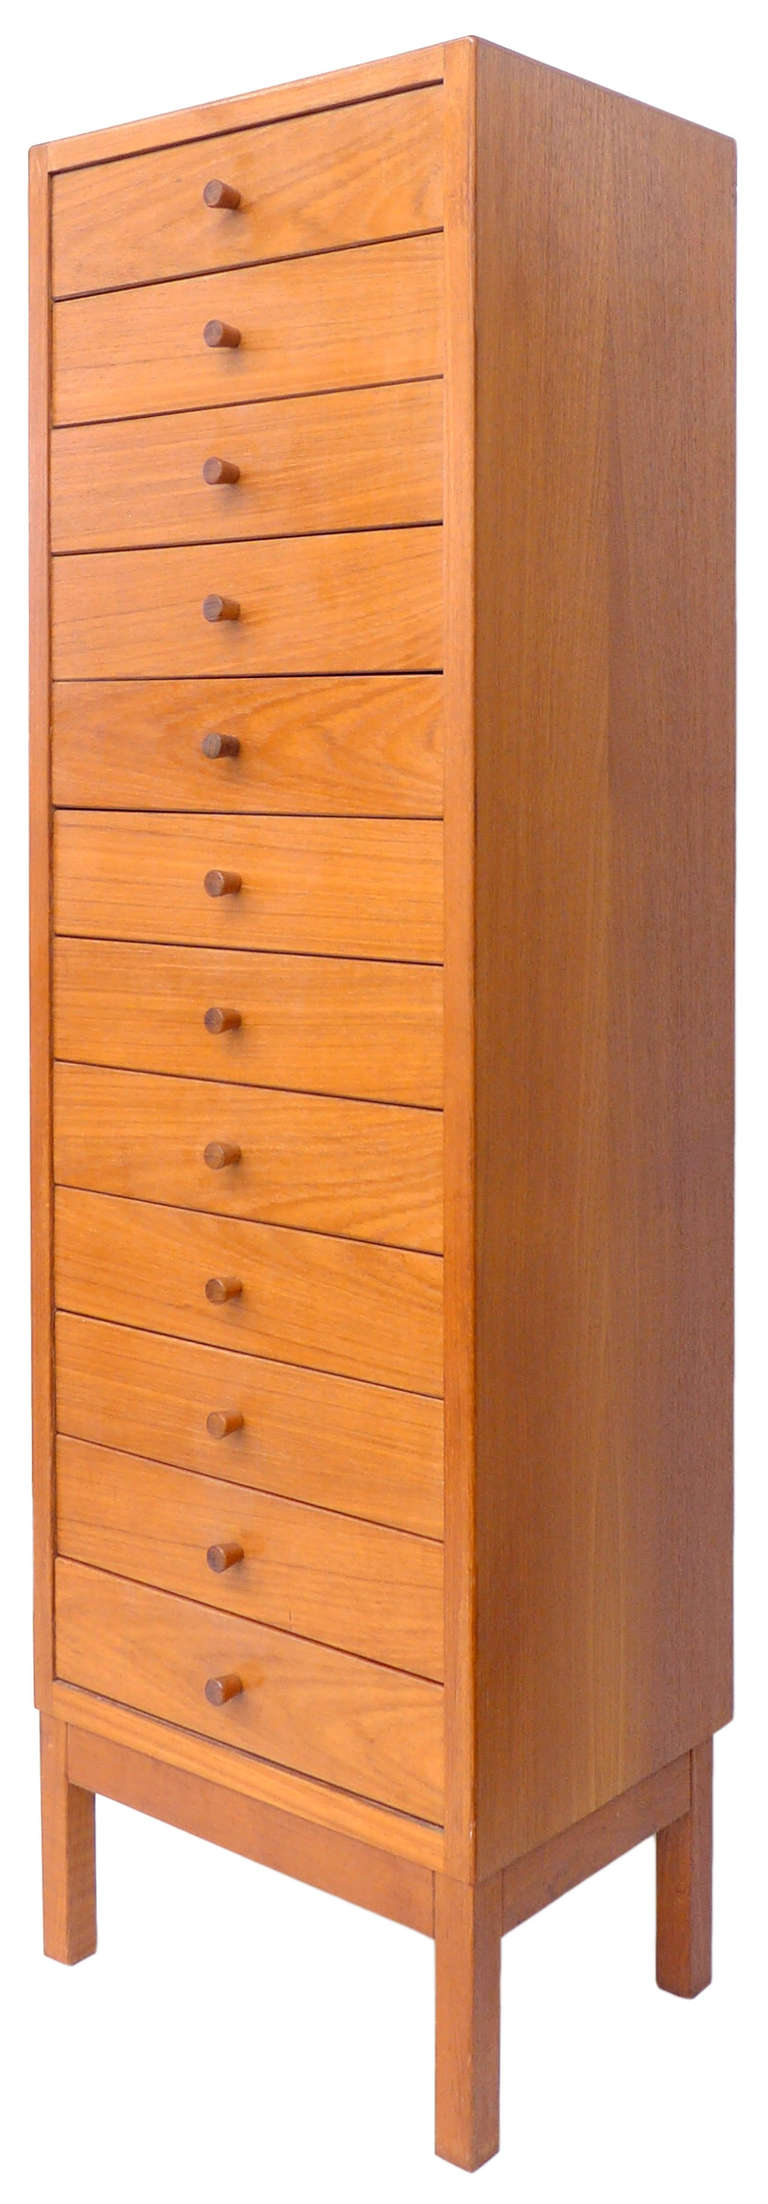 A wonderful Danish chest of drawers with fantastic scale and form made by J. Ingvard Jensen. Twelve-drawer minimalist design with beautiful construction details. A very elegant and  unusual cabinet which is both utilitarian and sculptural. Wonderful